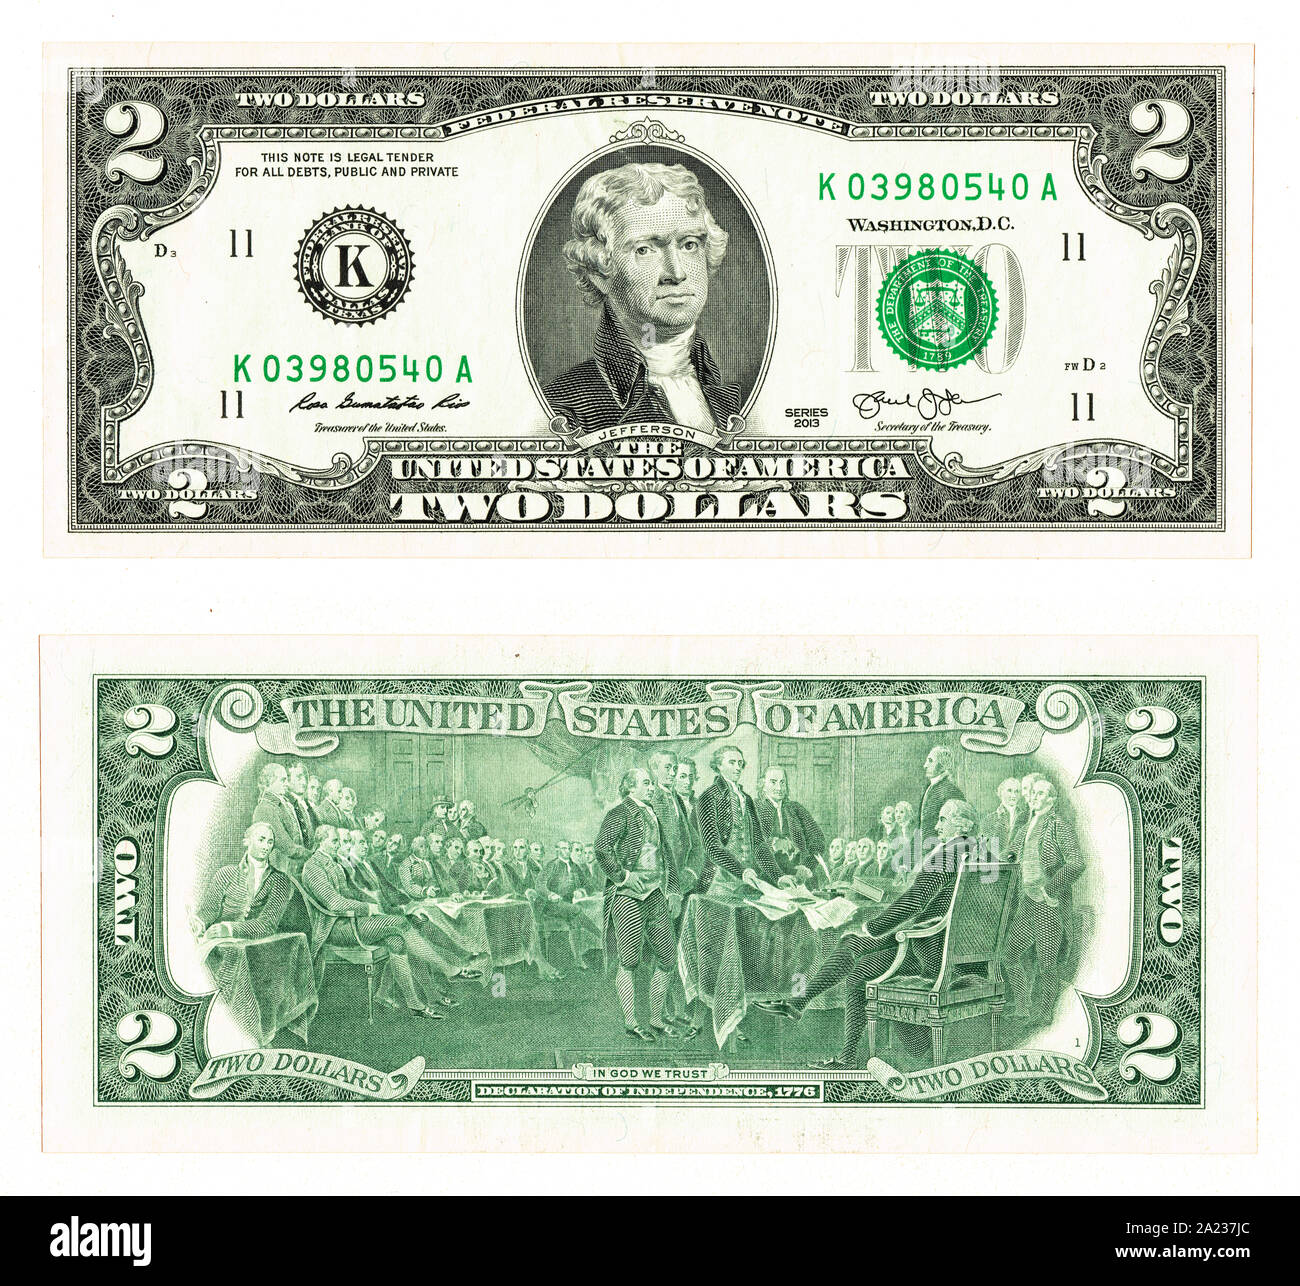 two dollar united states currency scan high resolution on a white background Stock Photo